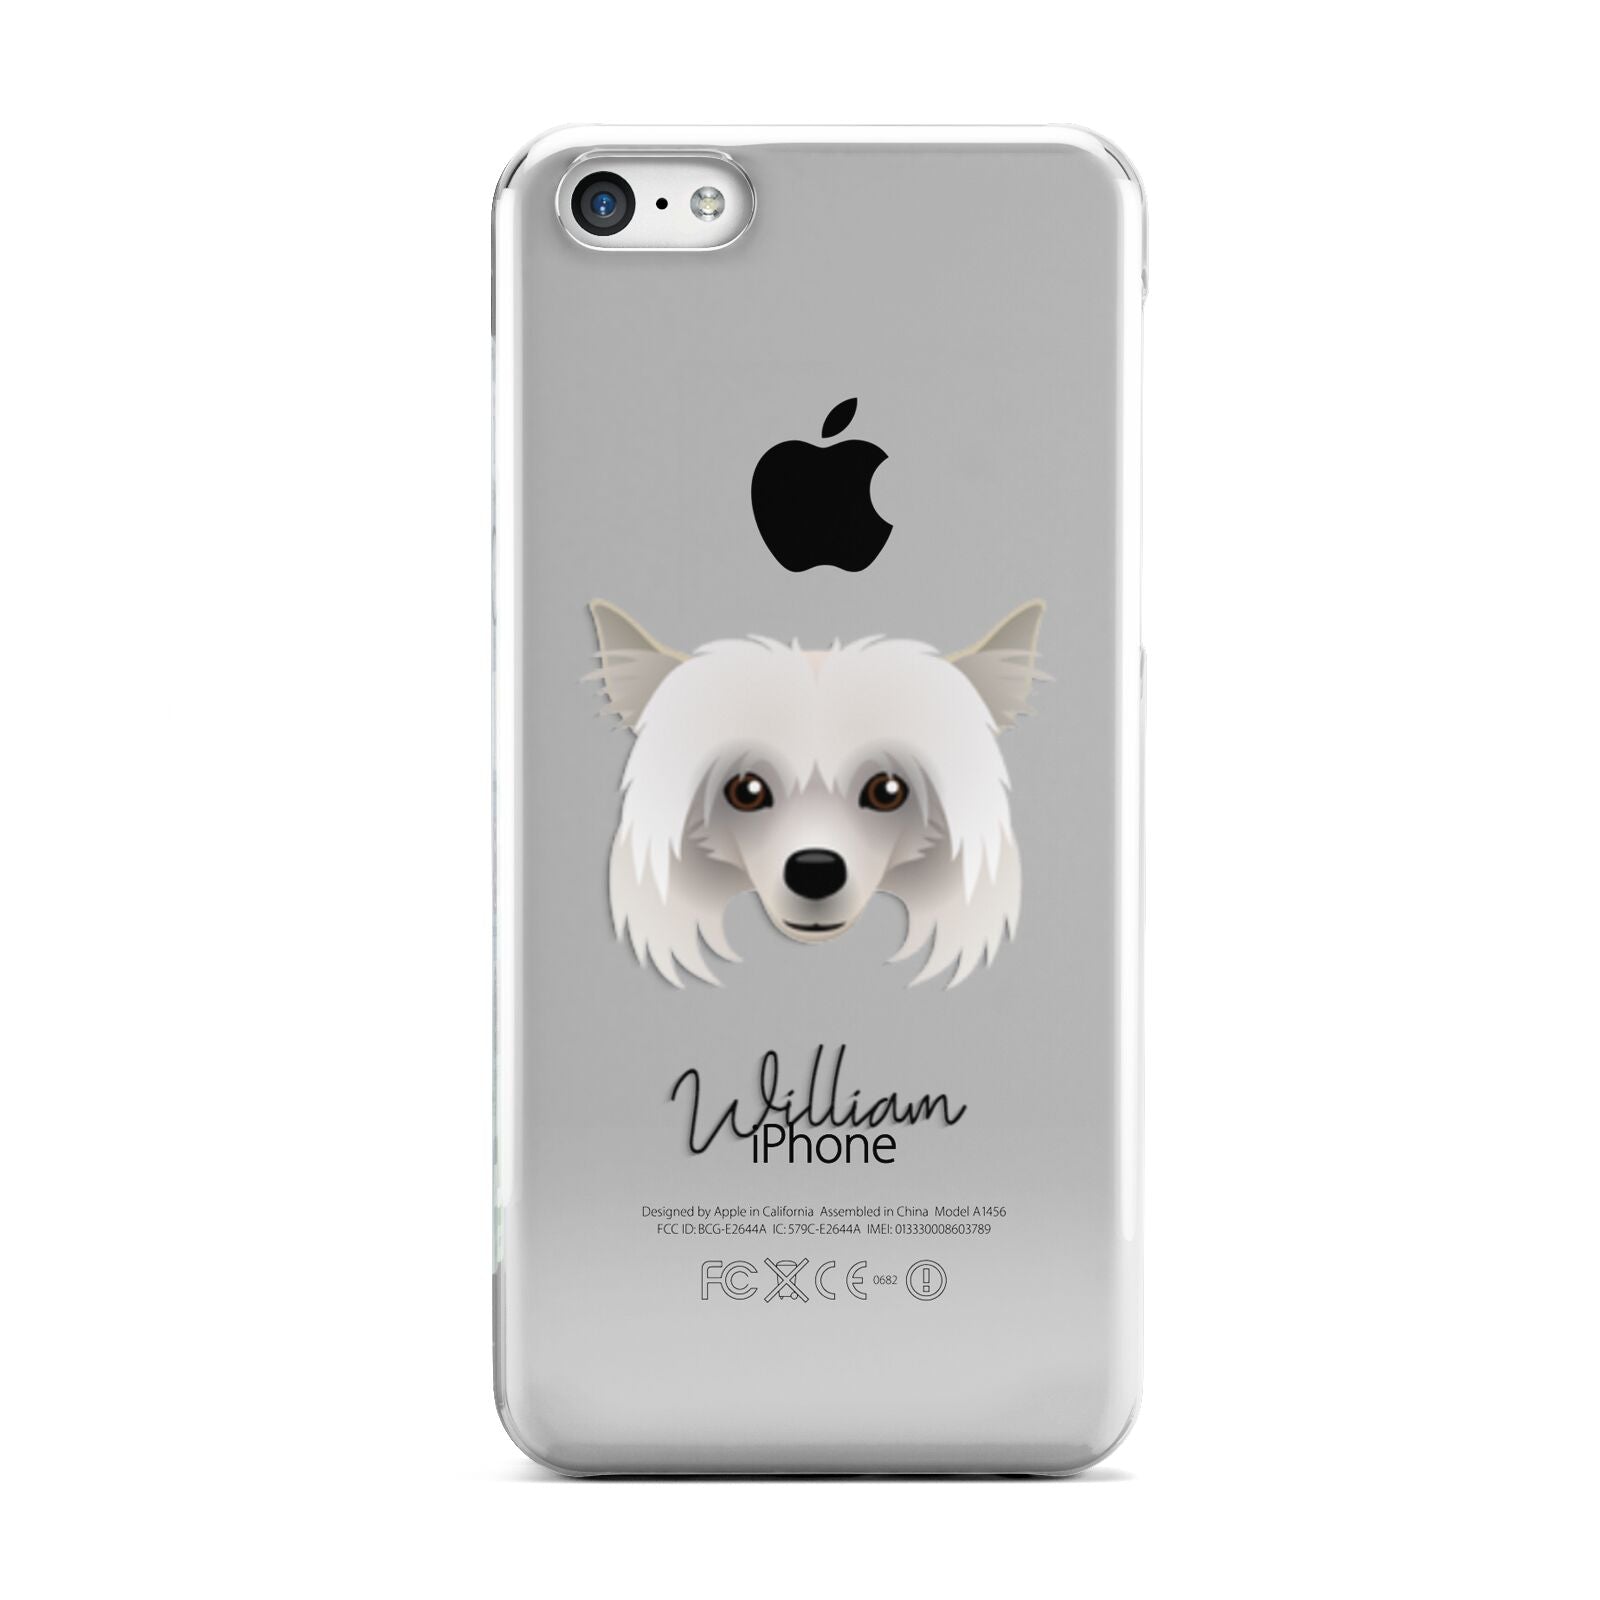 Powderpuff Chinese Crested Personalised Apple iPhone 5c Case